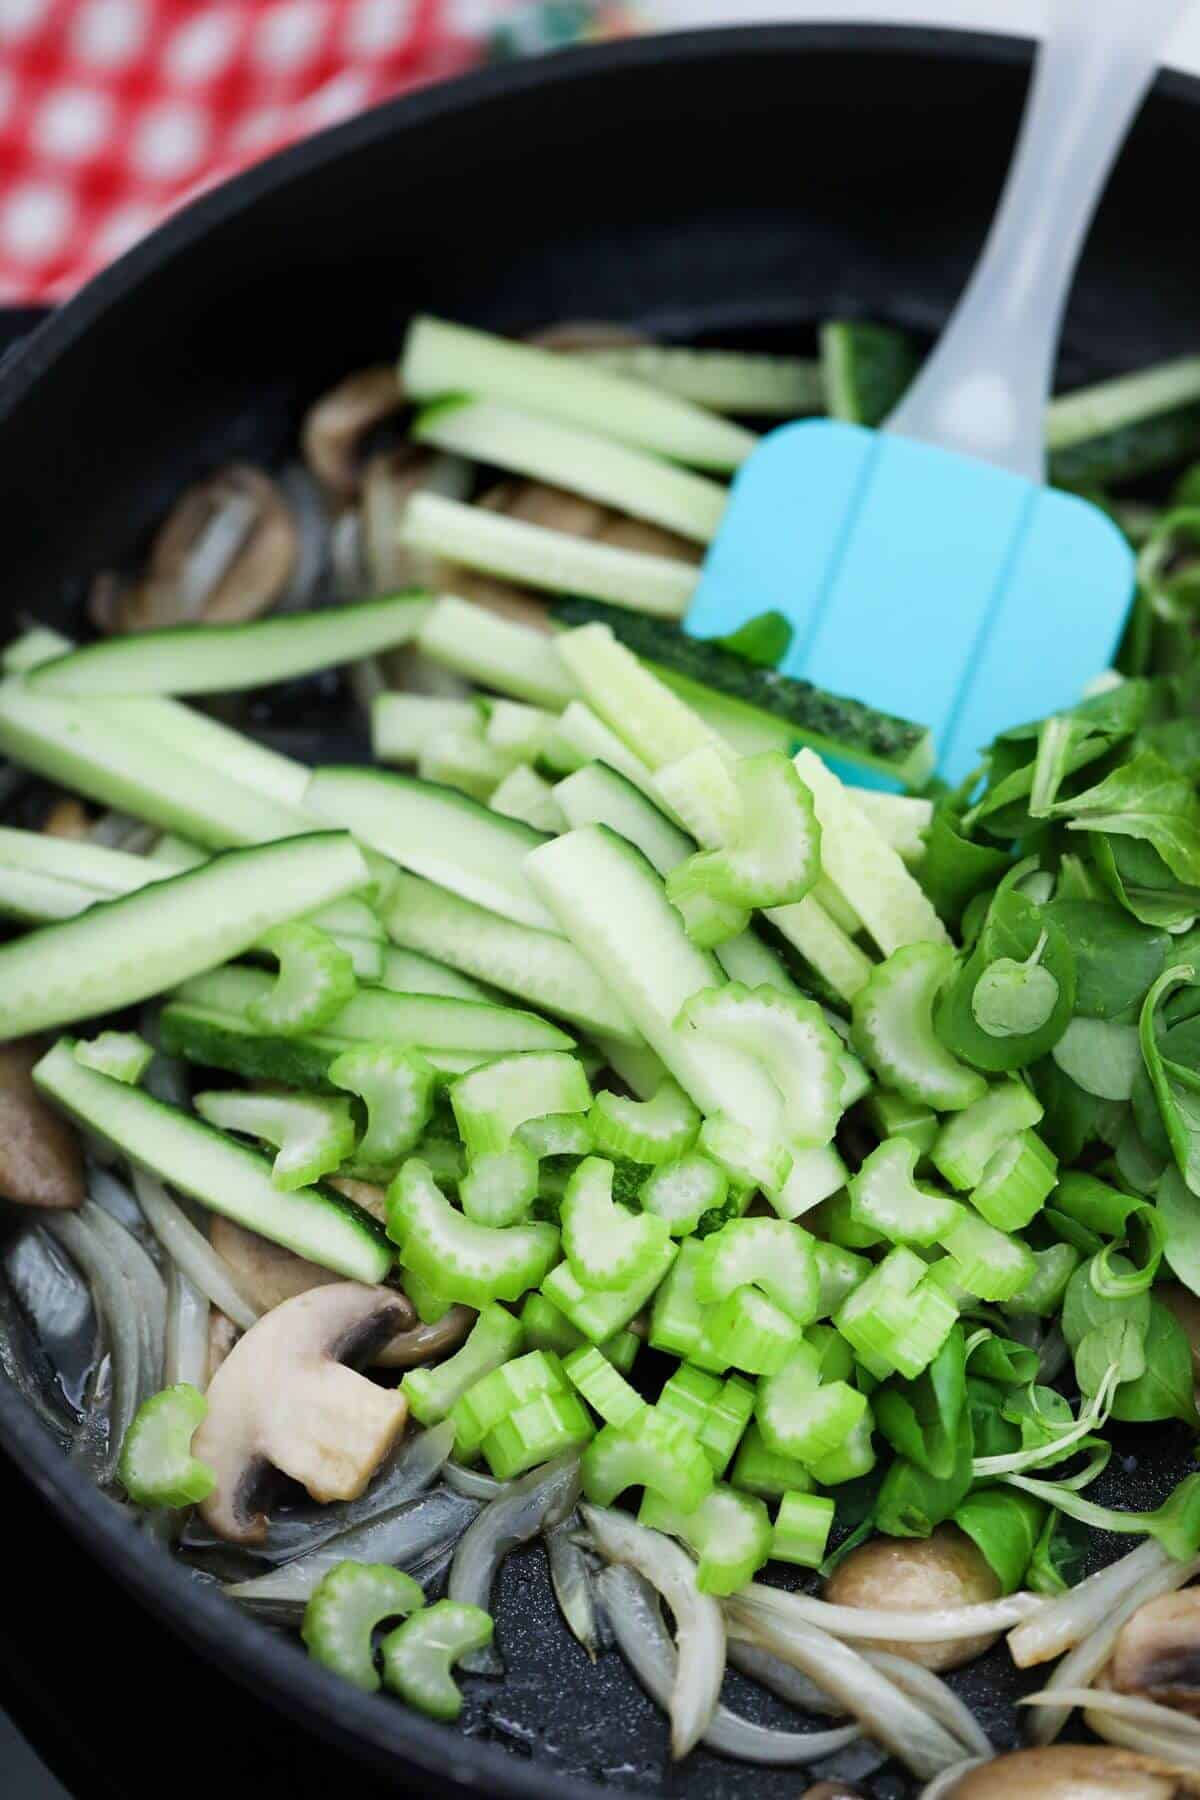 A frying pan filled with vegetables and a blue spatula.